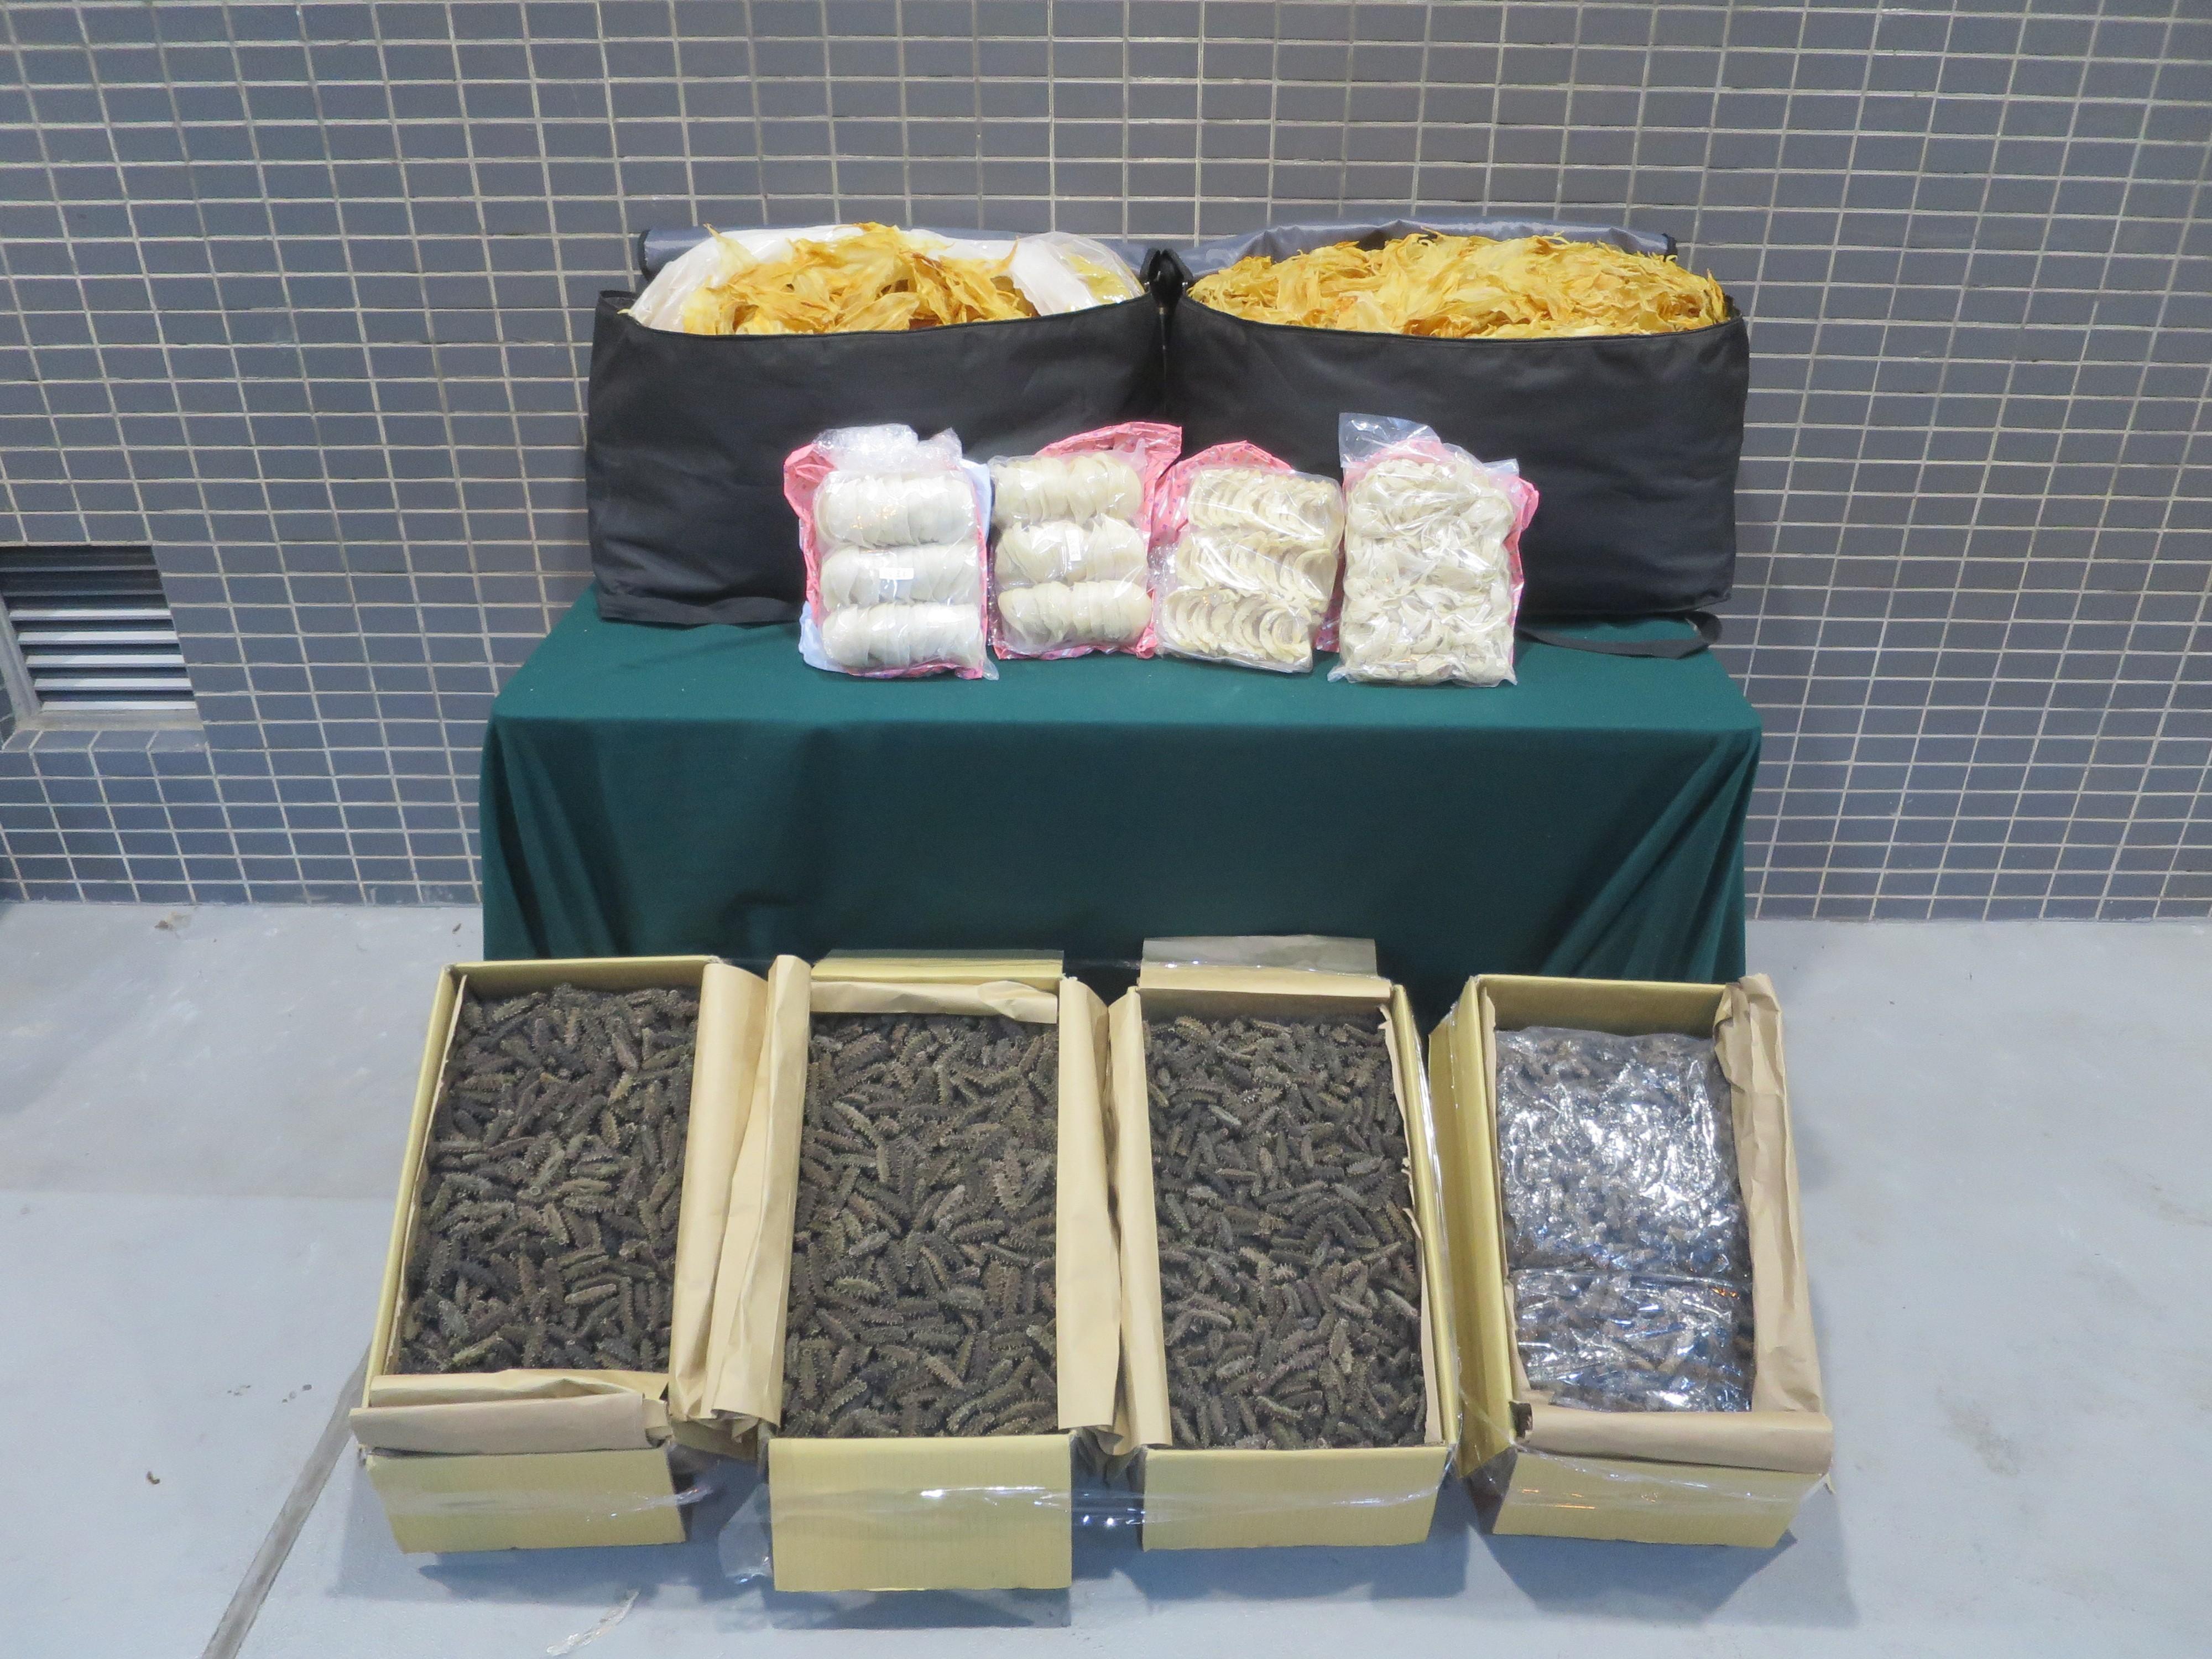 Hong Kong Customs yesterday (November 12) mounted an anti-smuggling operation at the Shenzhen Bay Control Point and detected a suspected smuggling case involving a cross-boundary private car. A batch of suspected smuggled dried seafood, including about 57 kilograms of dried sea cucumber, 28kg of dried fish maw and 2.2kg of bird nest, with a total estimated market value of about $1.13 million was seized. Photo shows the suspected smuggled dried seafood seized. 